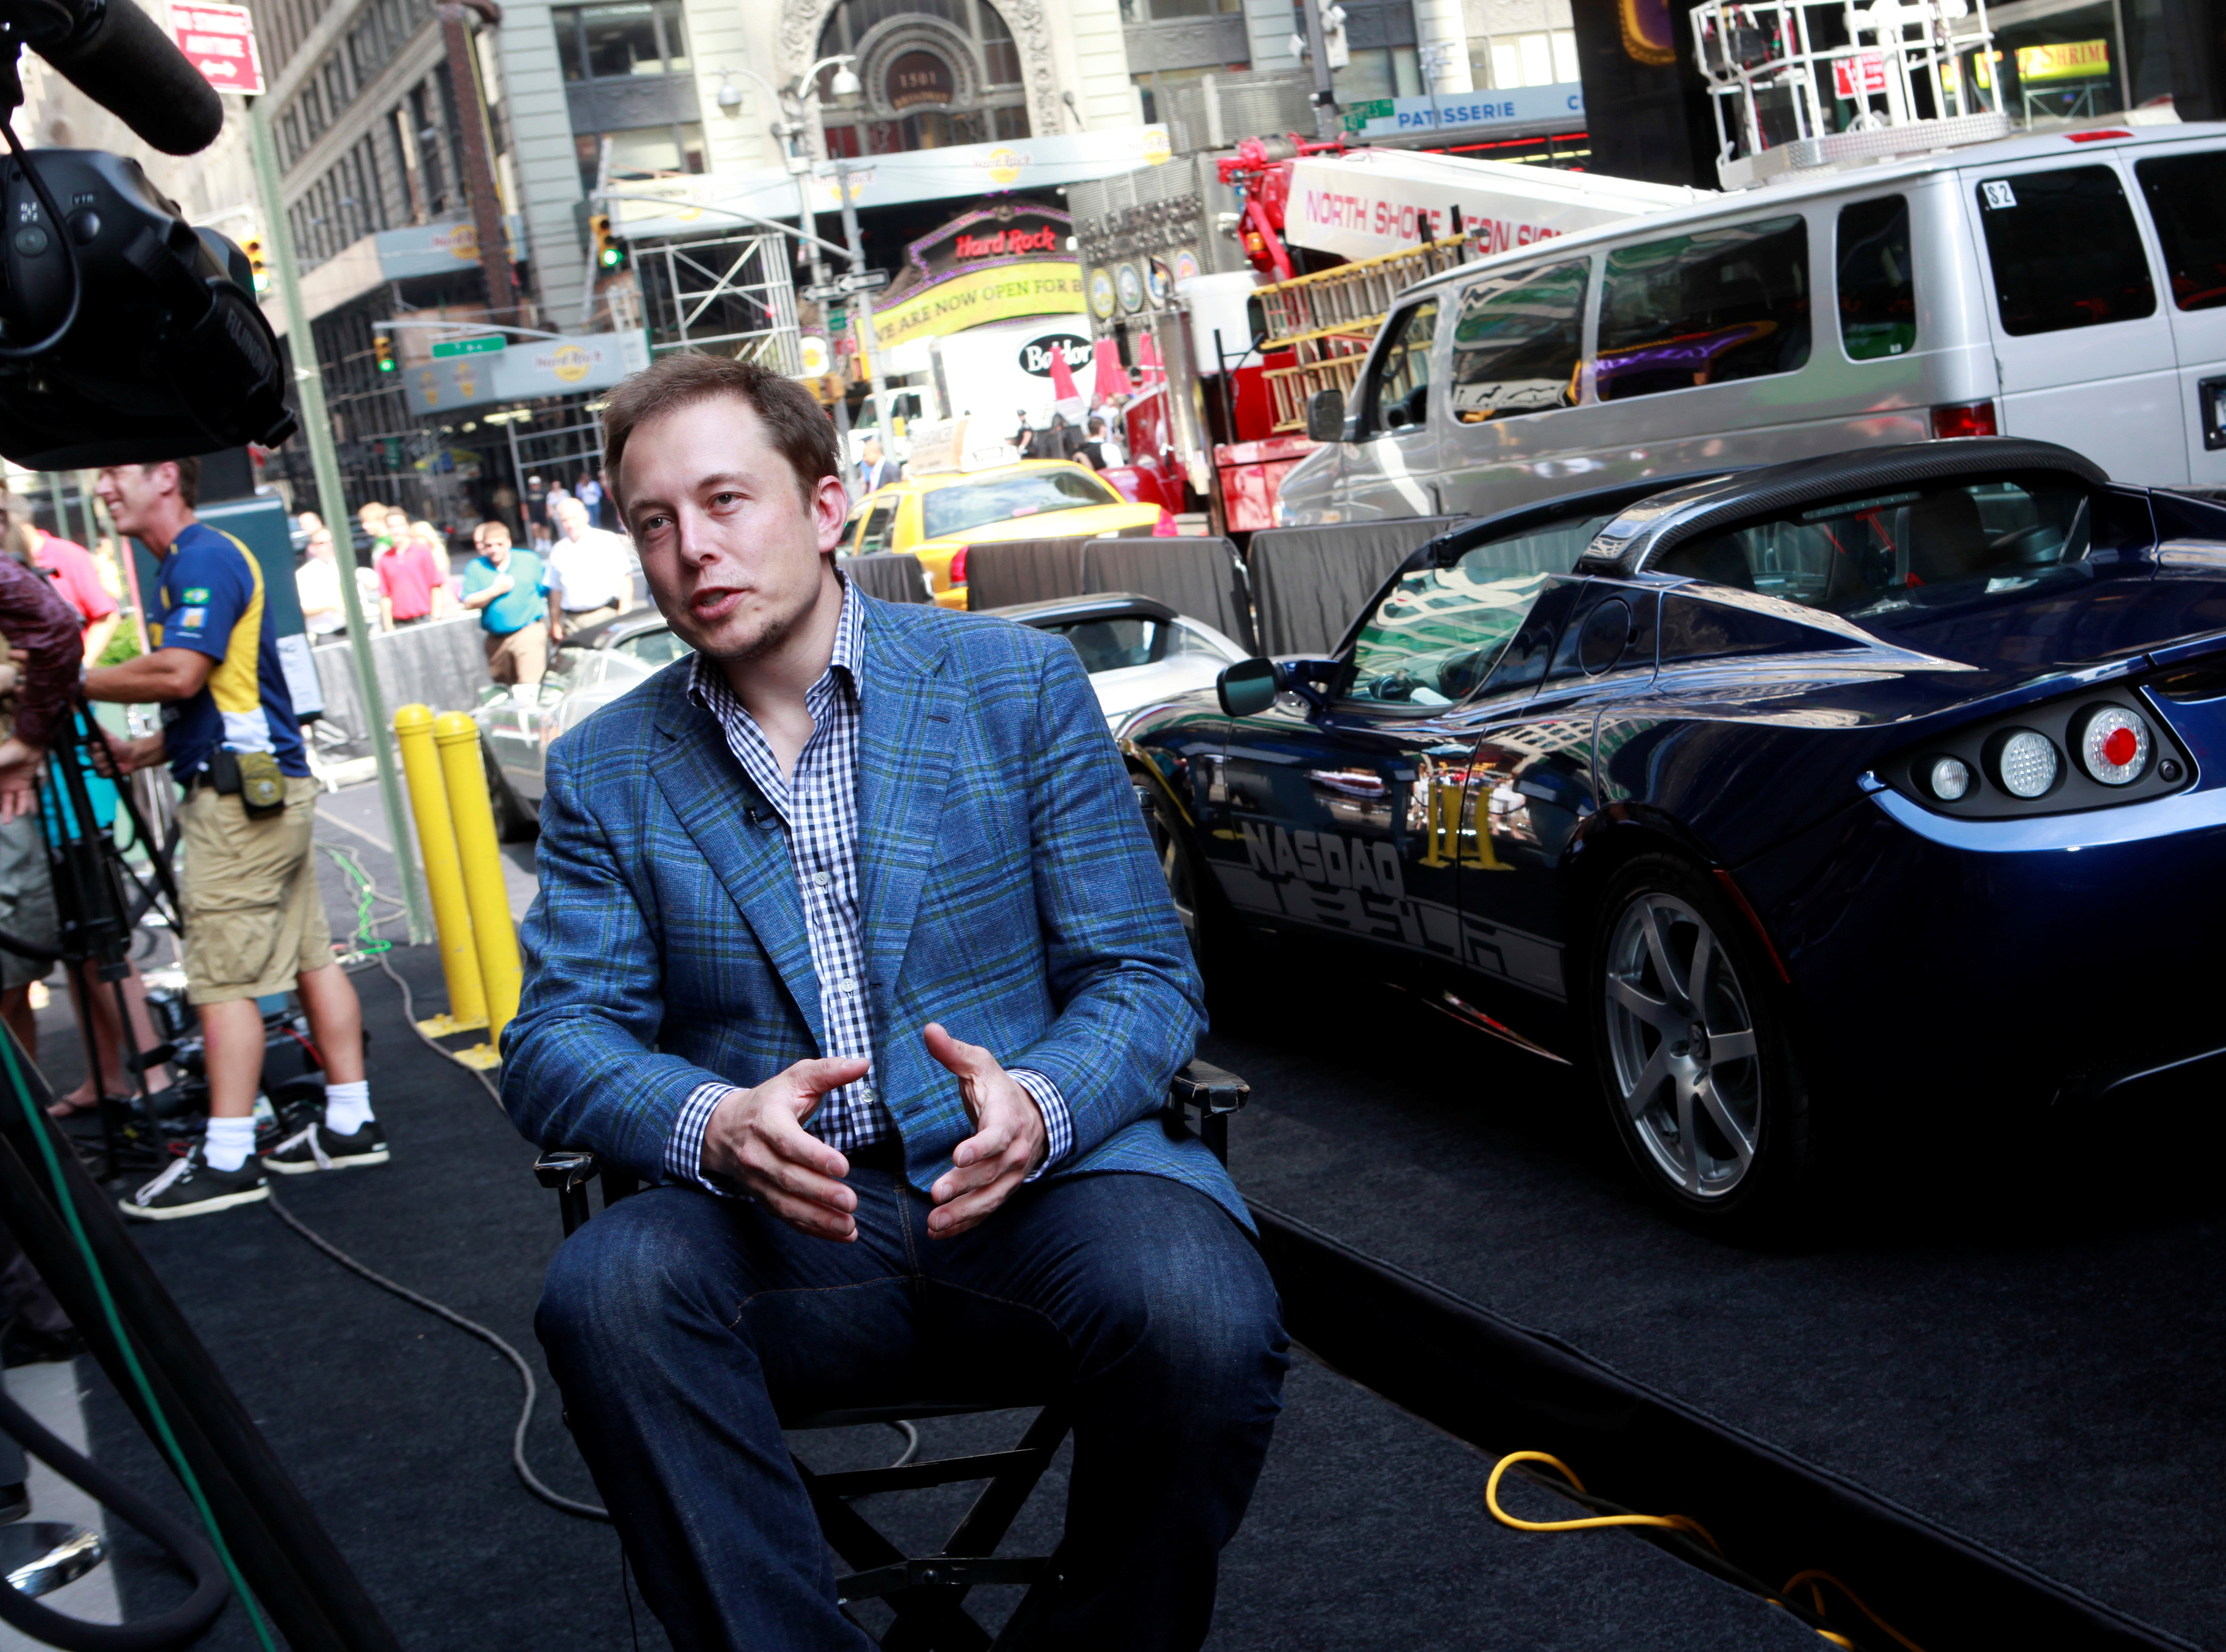 CEO of Tesla Motors Elon Musk speaks during a television interview after his company's initial public offering at the NASDAQ market in New York